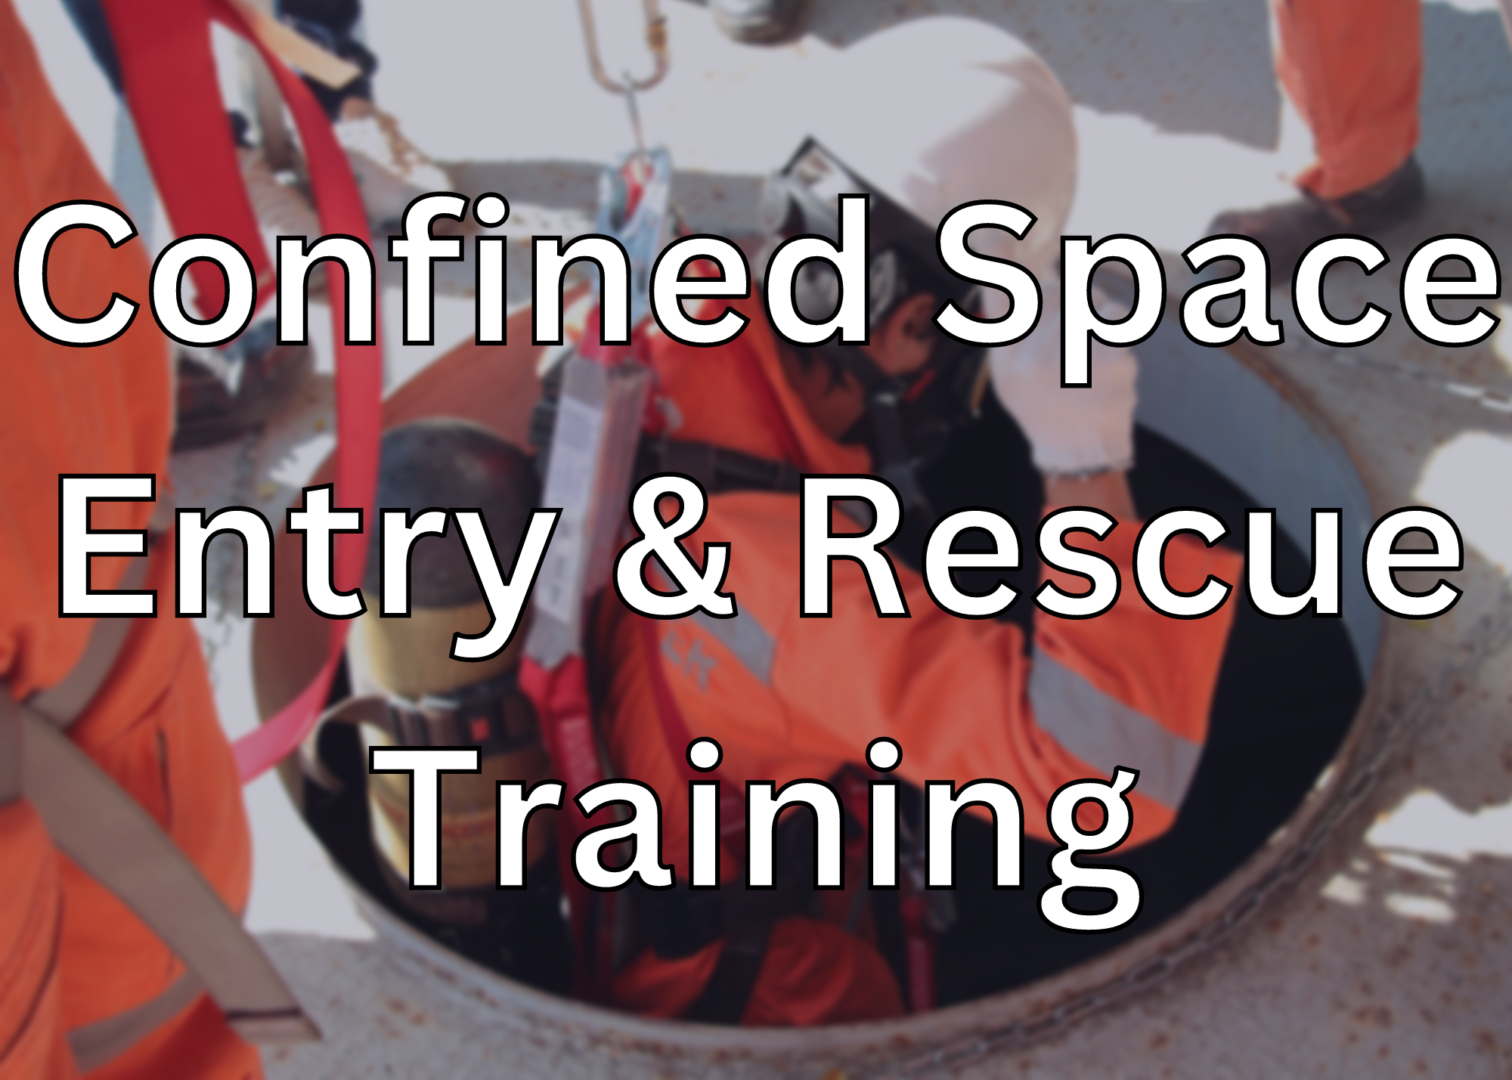 Confined Space Entry & Rescue Training